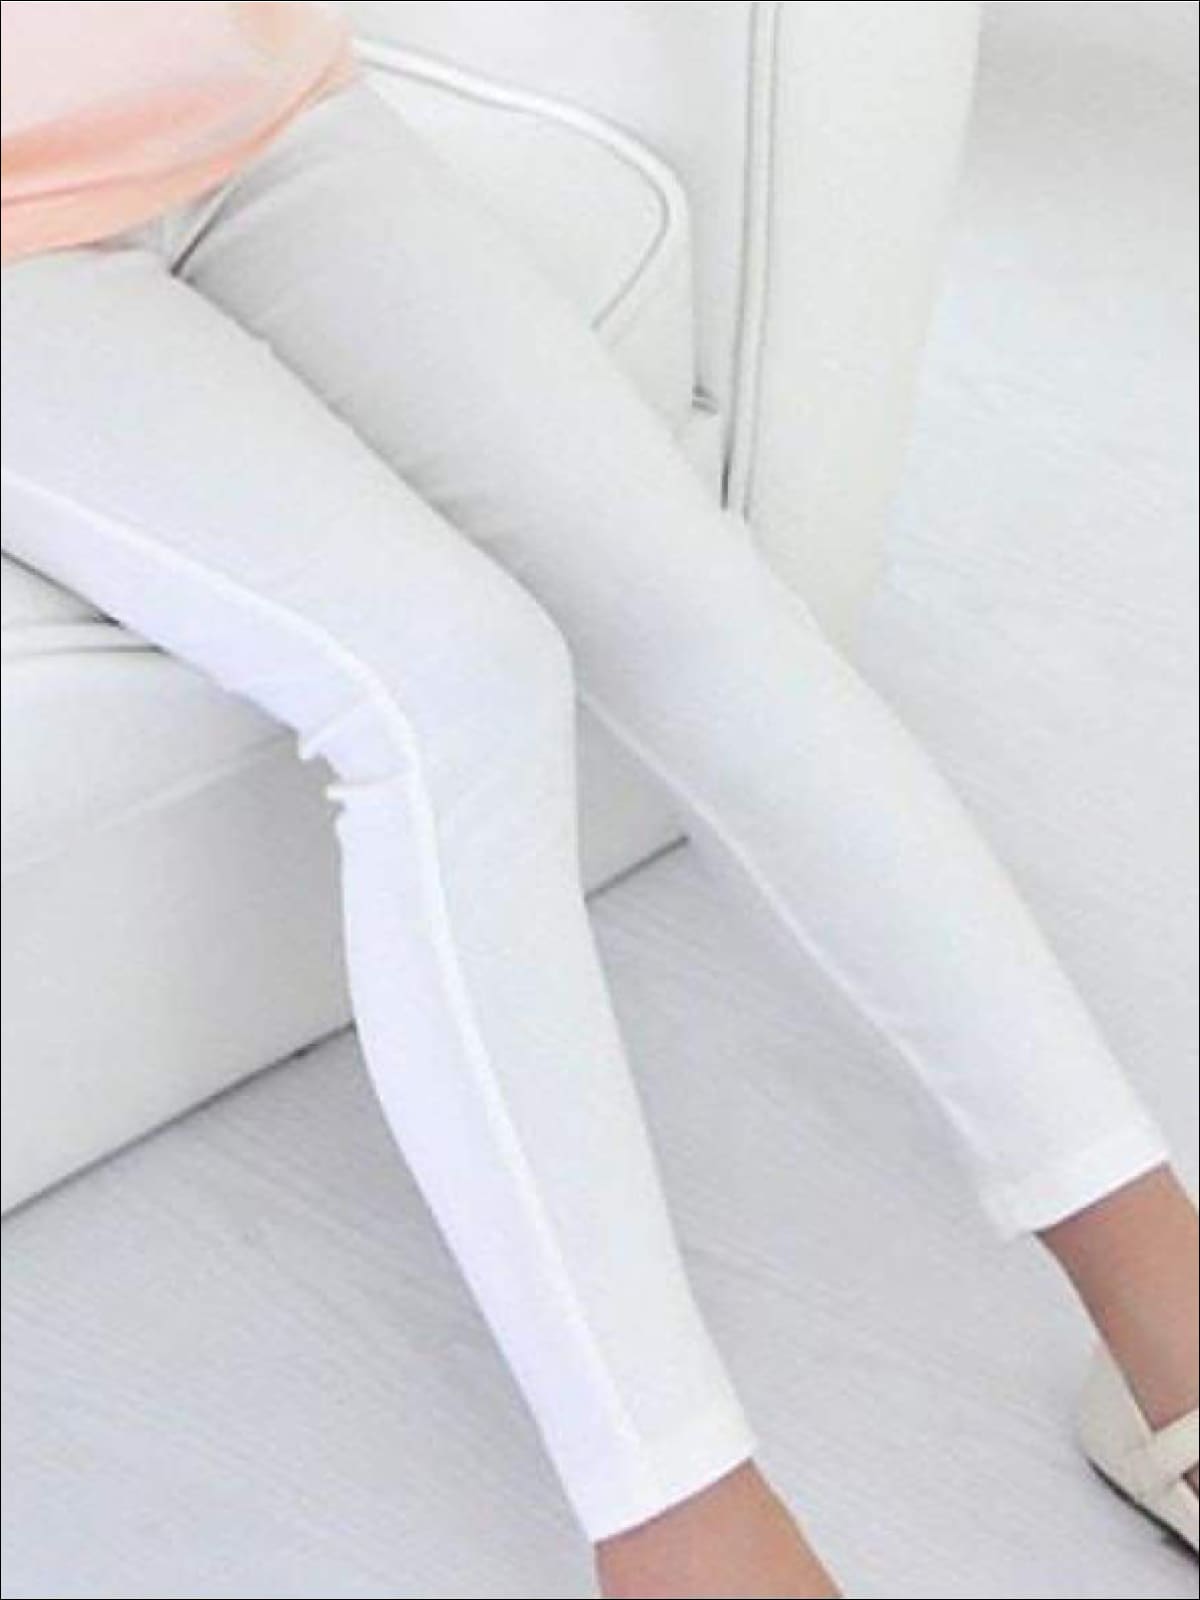 https://cdn.shopify.com/s/files/1/0996/1812/products/girls-stretch-candy-colored-faux-denim-jeggings-white-3t-19-99-and-under-20-39-40-59-2t3t-4t5y-mia-belle-overseas-fulfillment-baby_676.jpg?v=1577171076